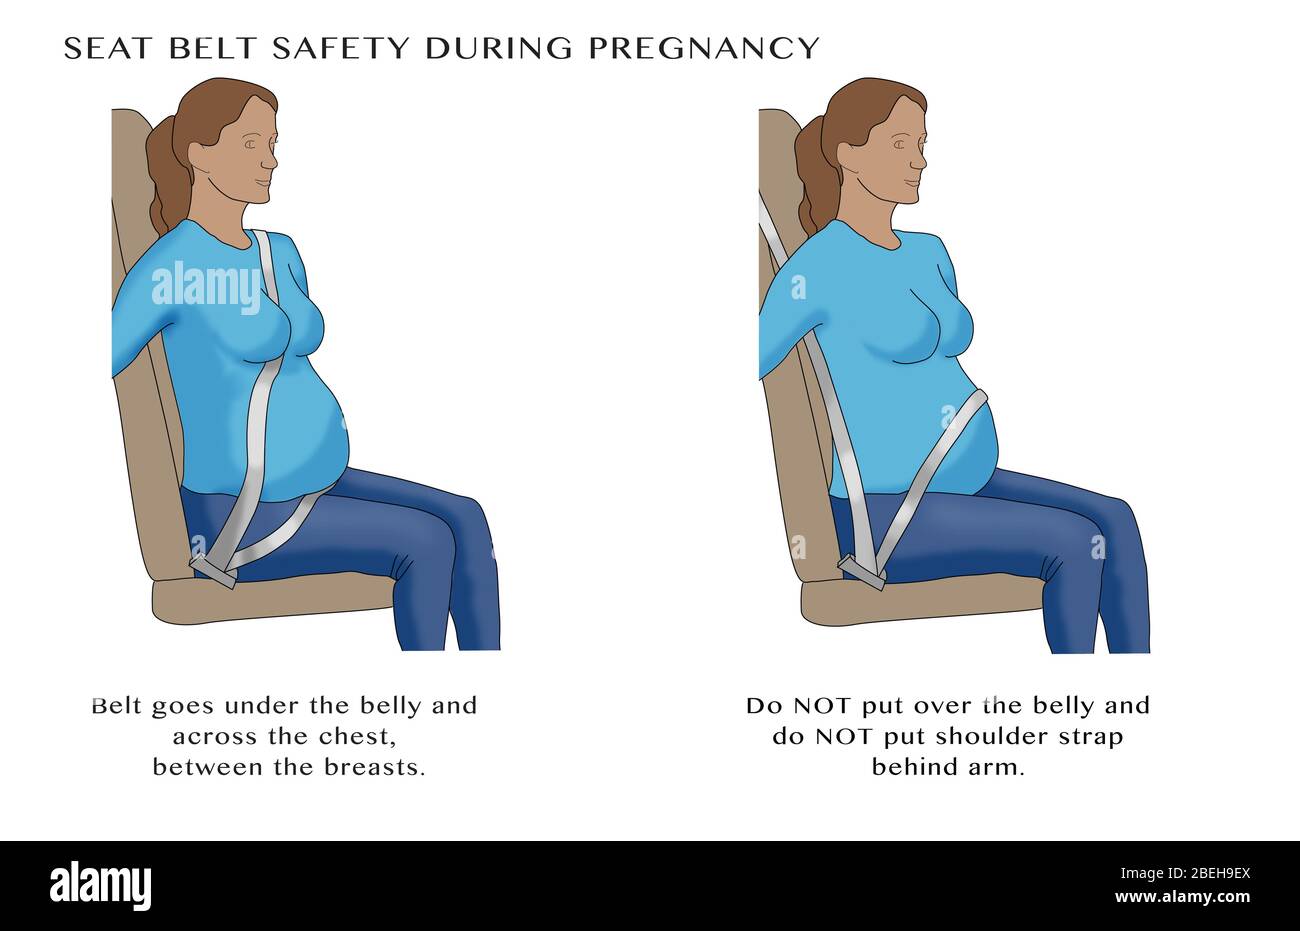 Seat belt safety for pregnant woman. Illustration. Stock Photo